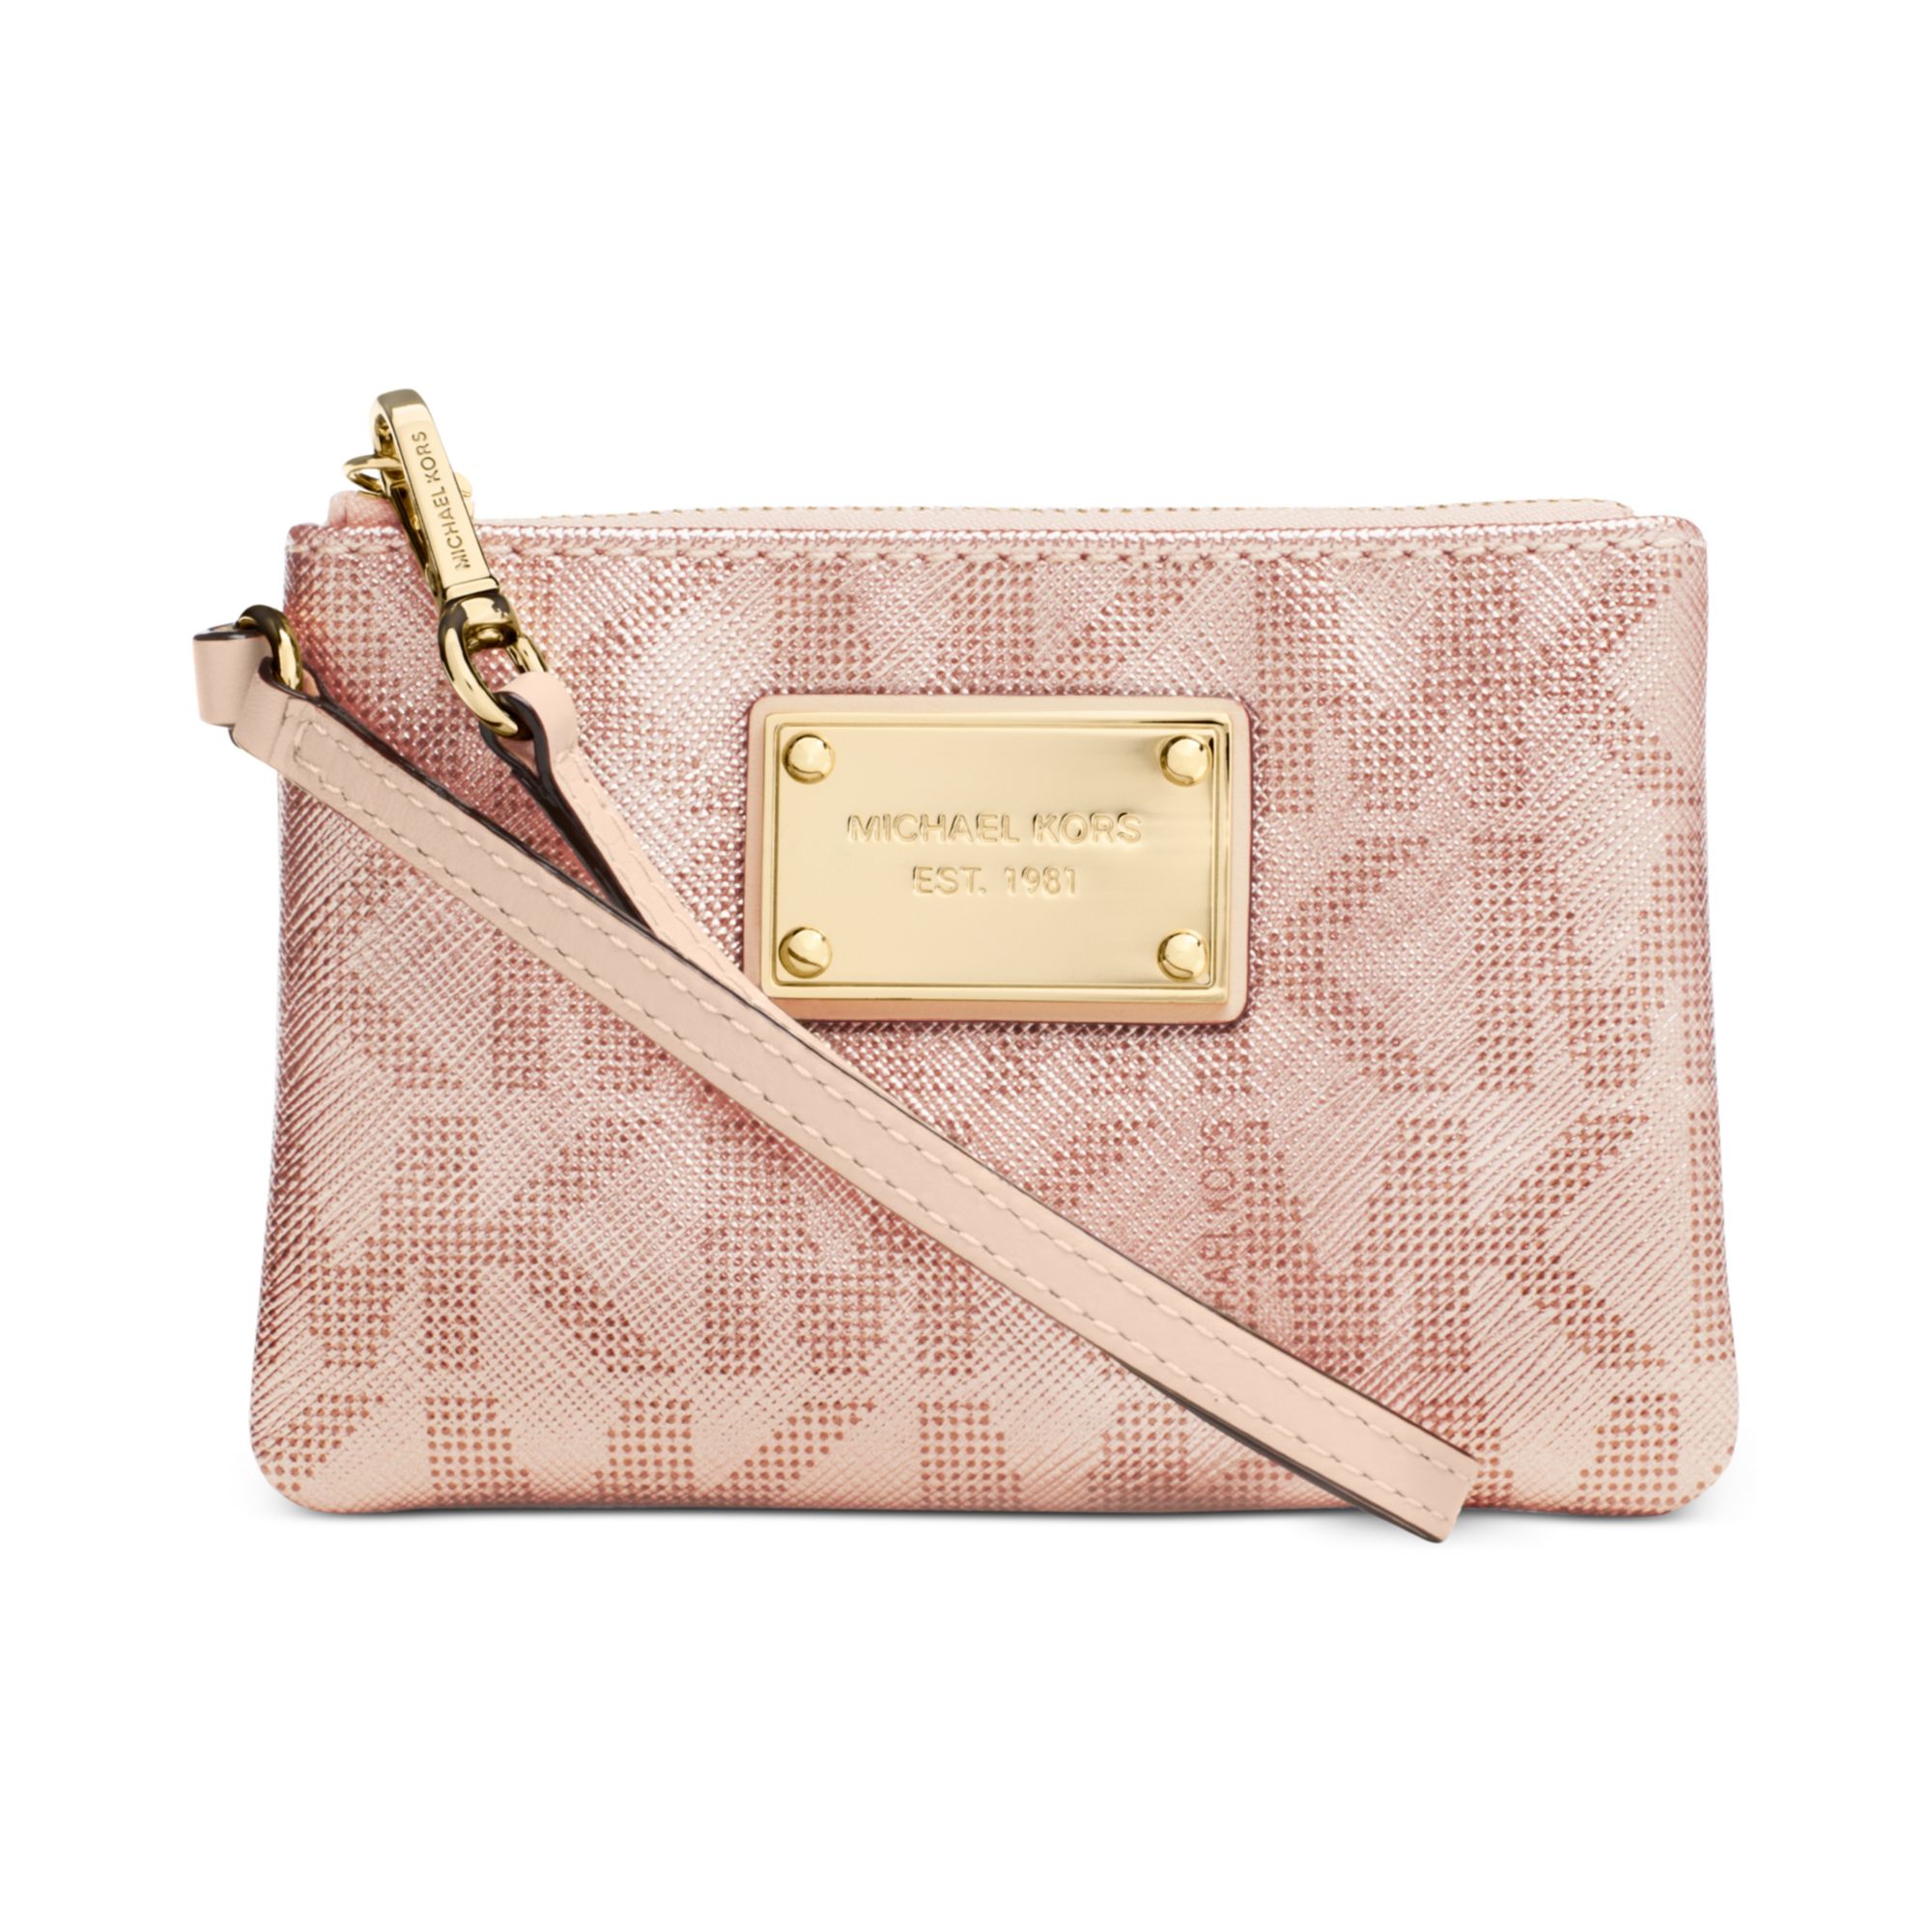 Lyst - Michael Kors Small Signature Wristlet in Pink